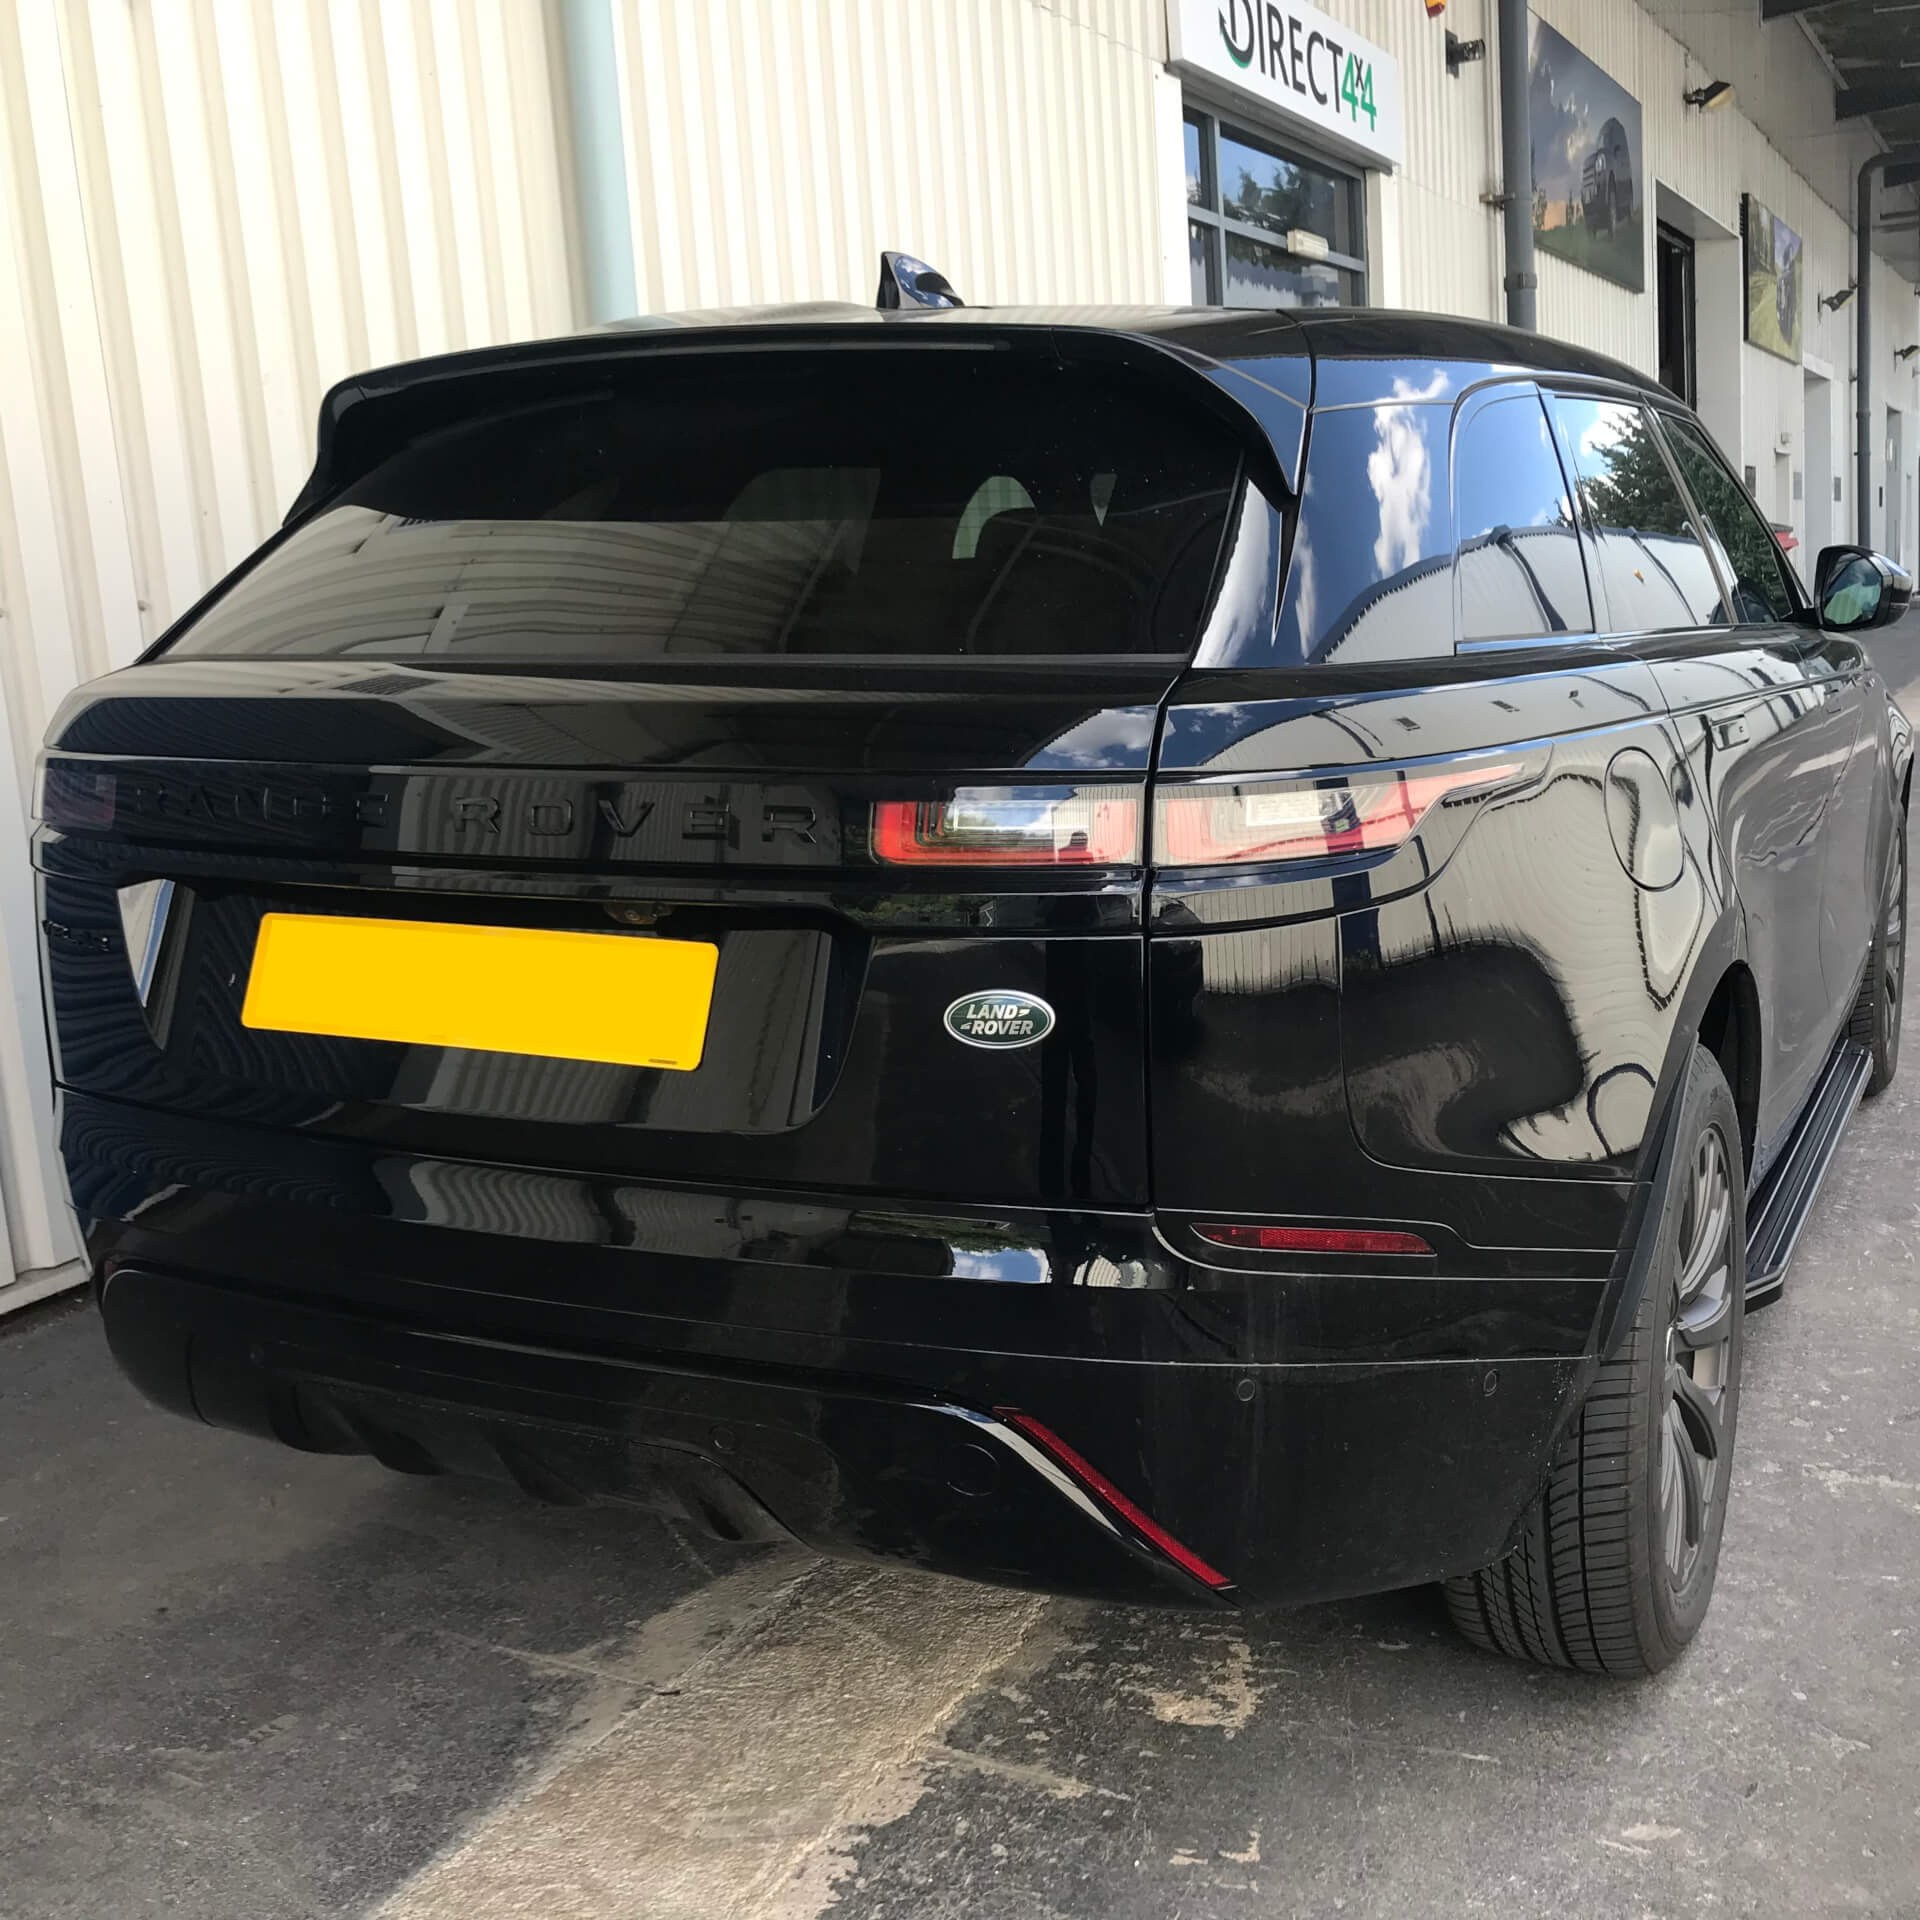 Direct4x4 accessories for Range Rover Velar vehicles with a photo of the back of a black Range Rover Velar fitted with our black raptor side steps outside our offices